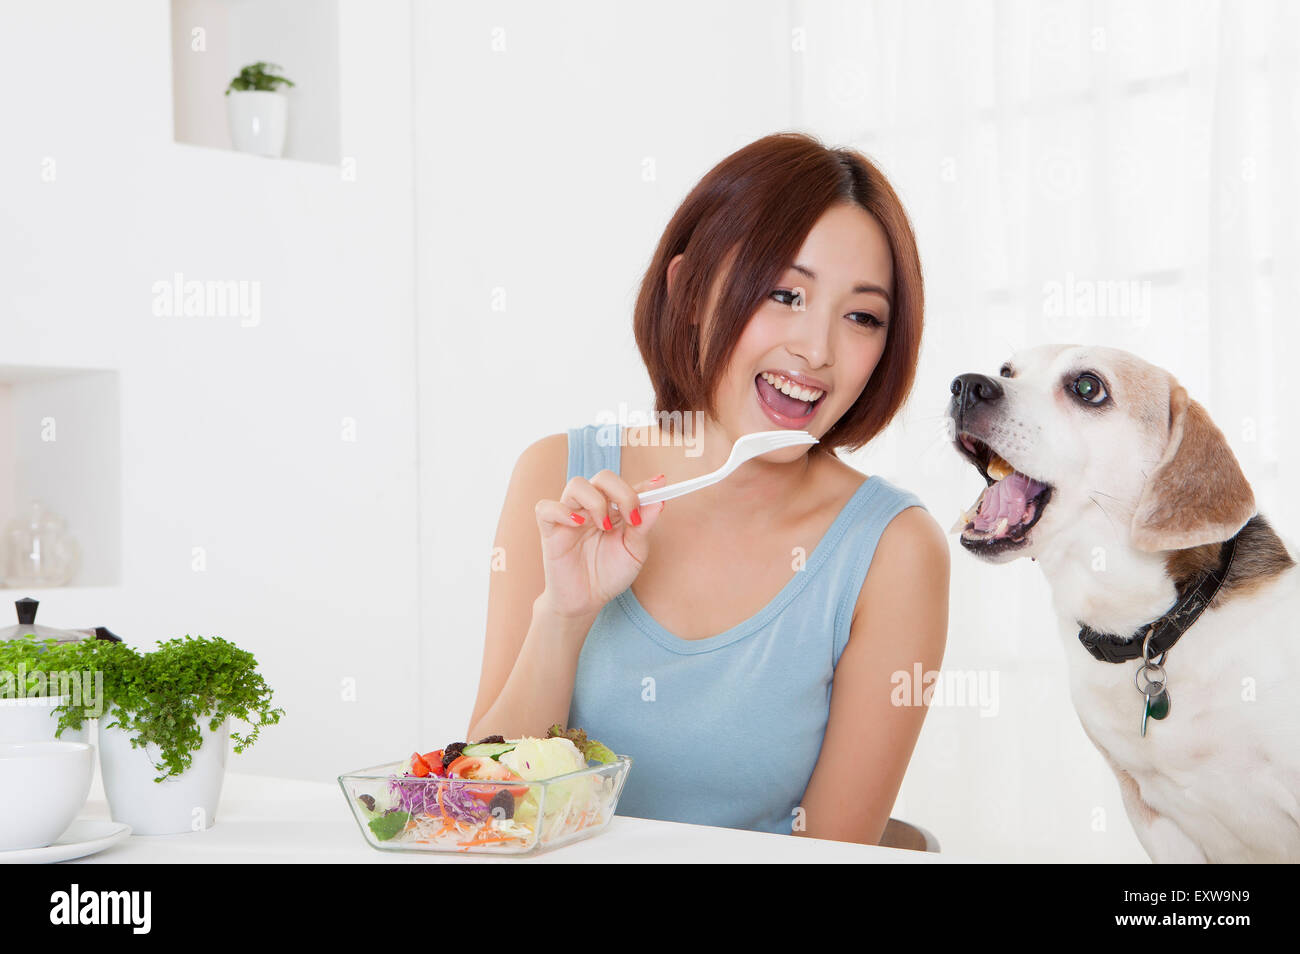 Young woman looking at dog with smile, Stock Photo